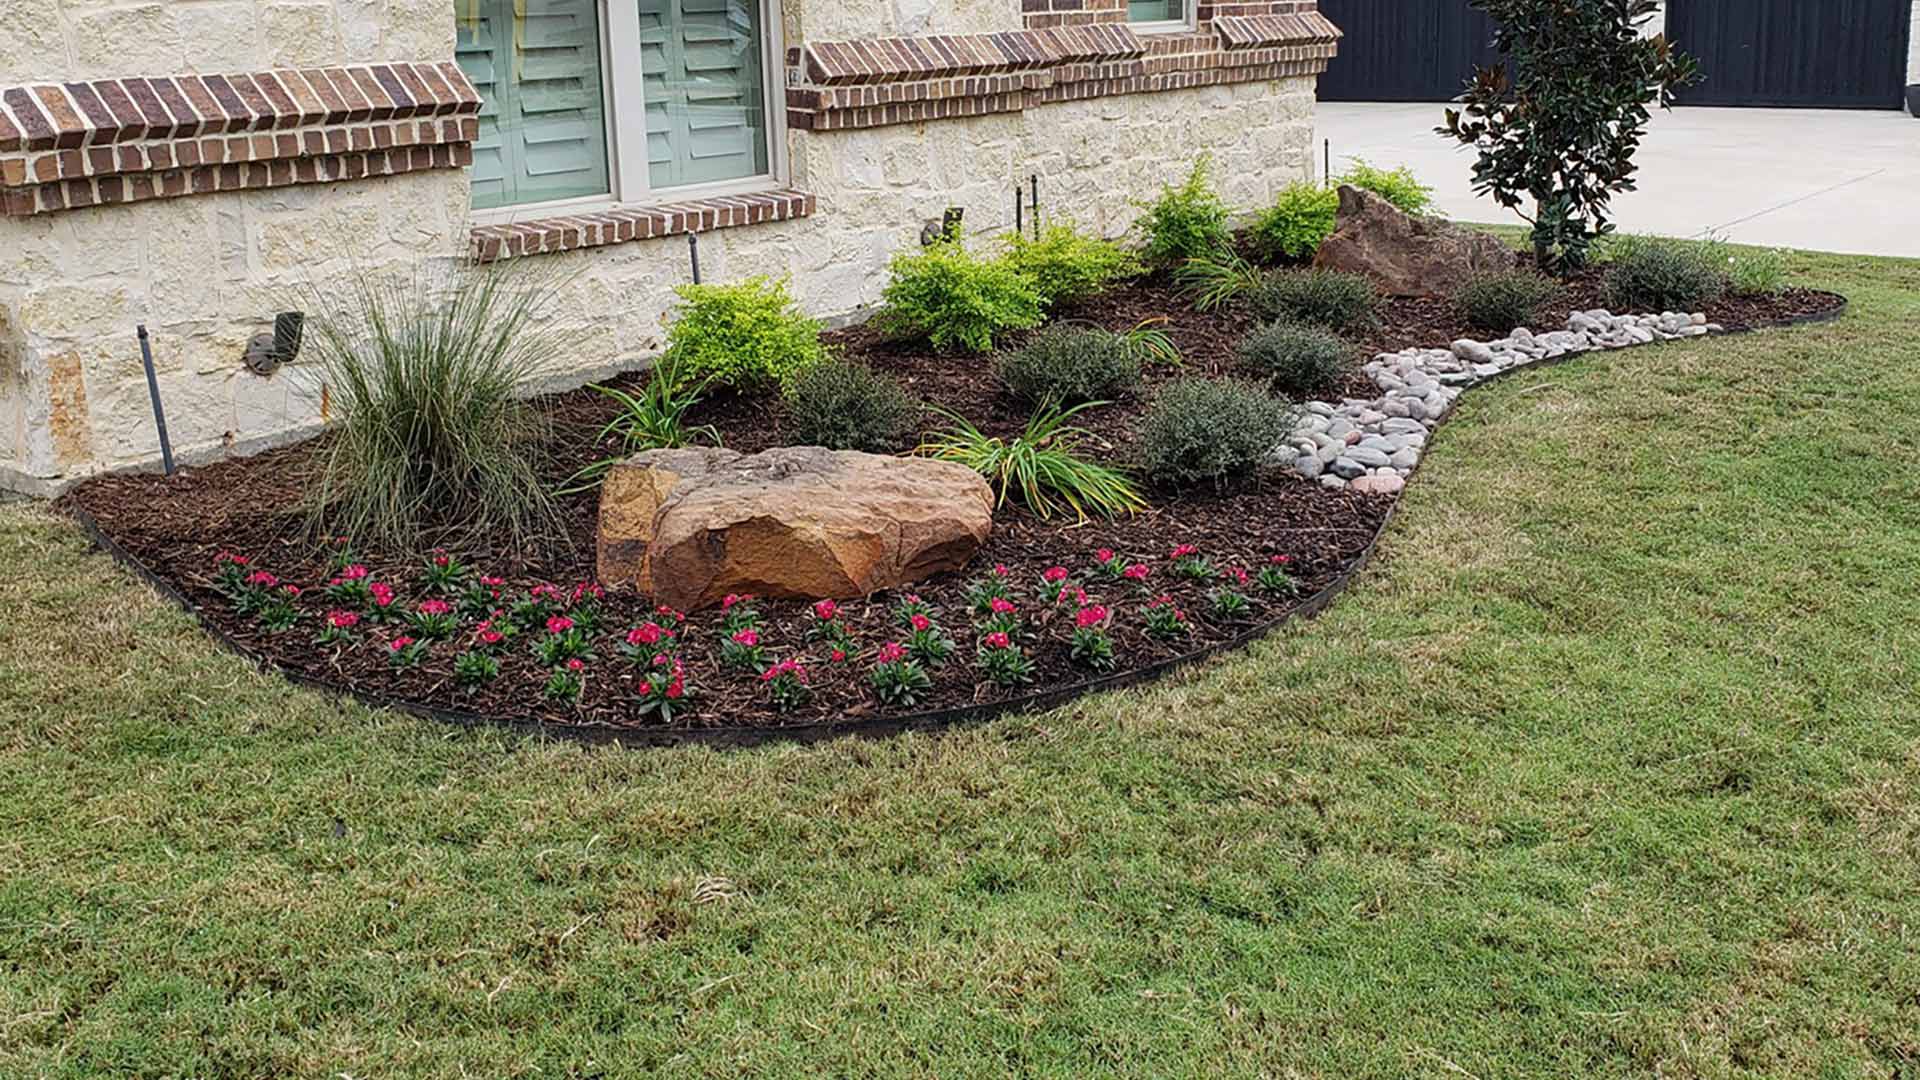 Installed plantings for front yard landscape bed in Northlake, TX.